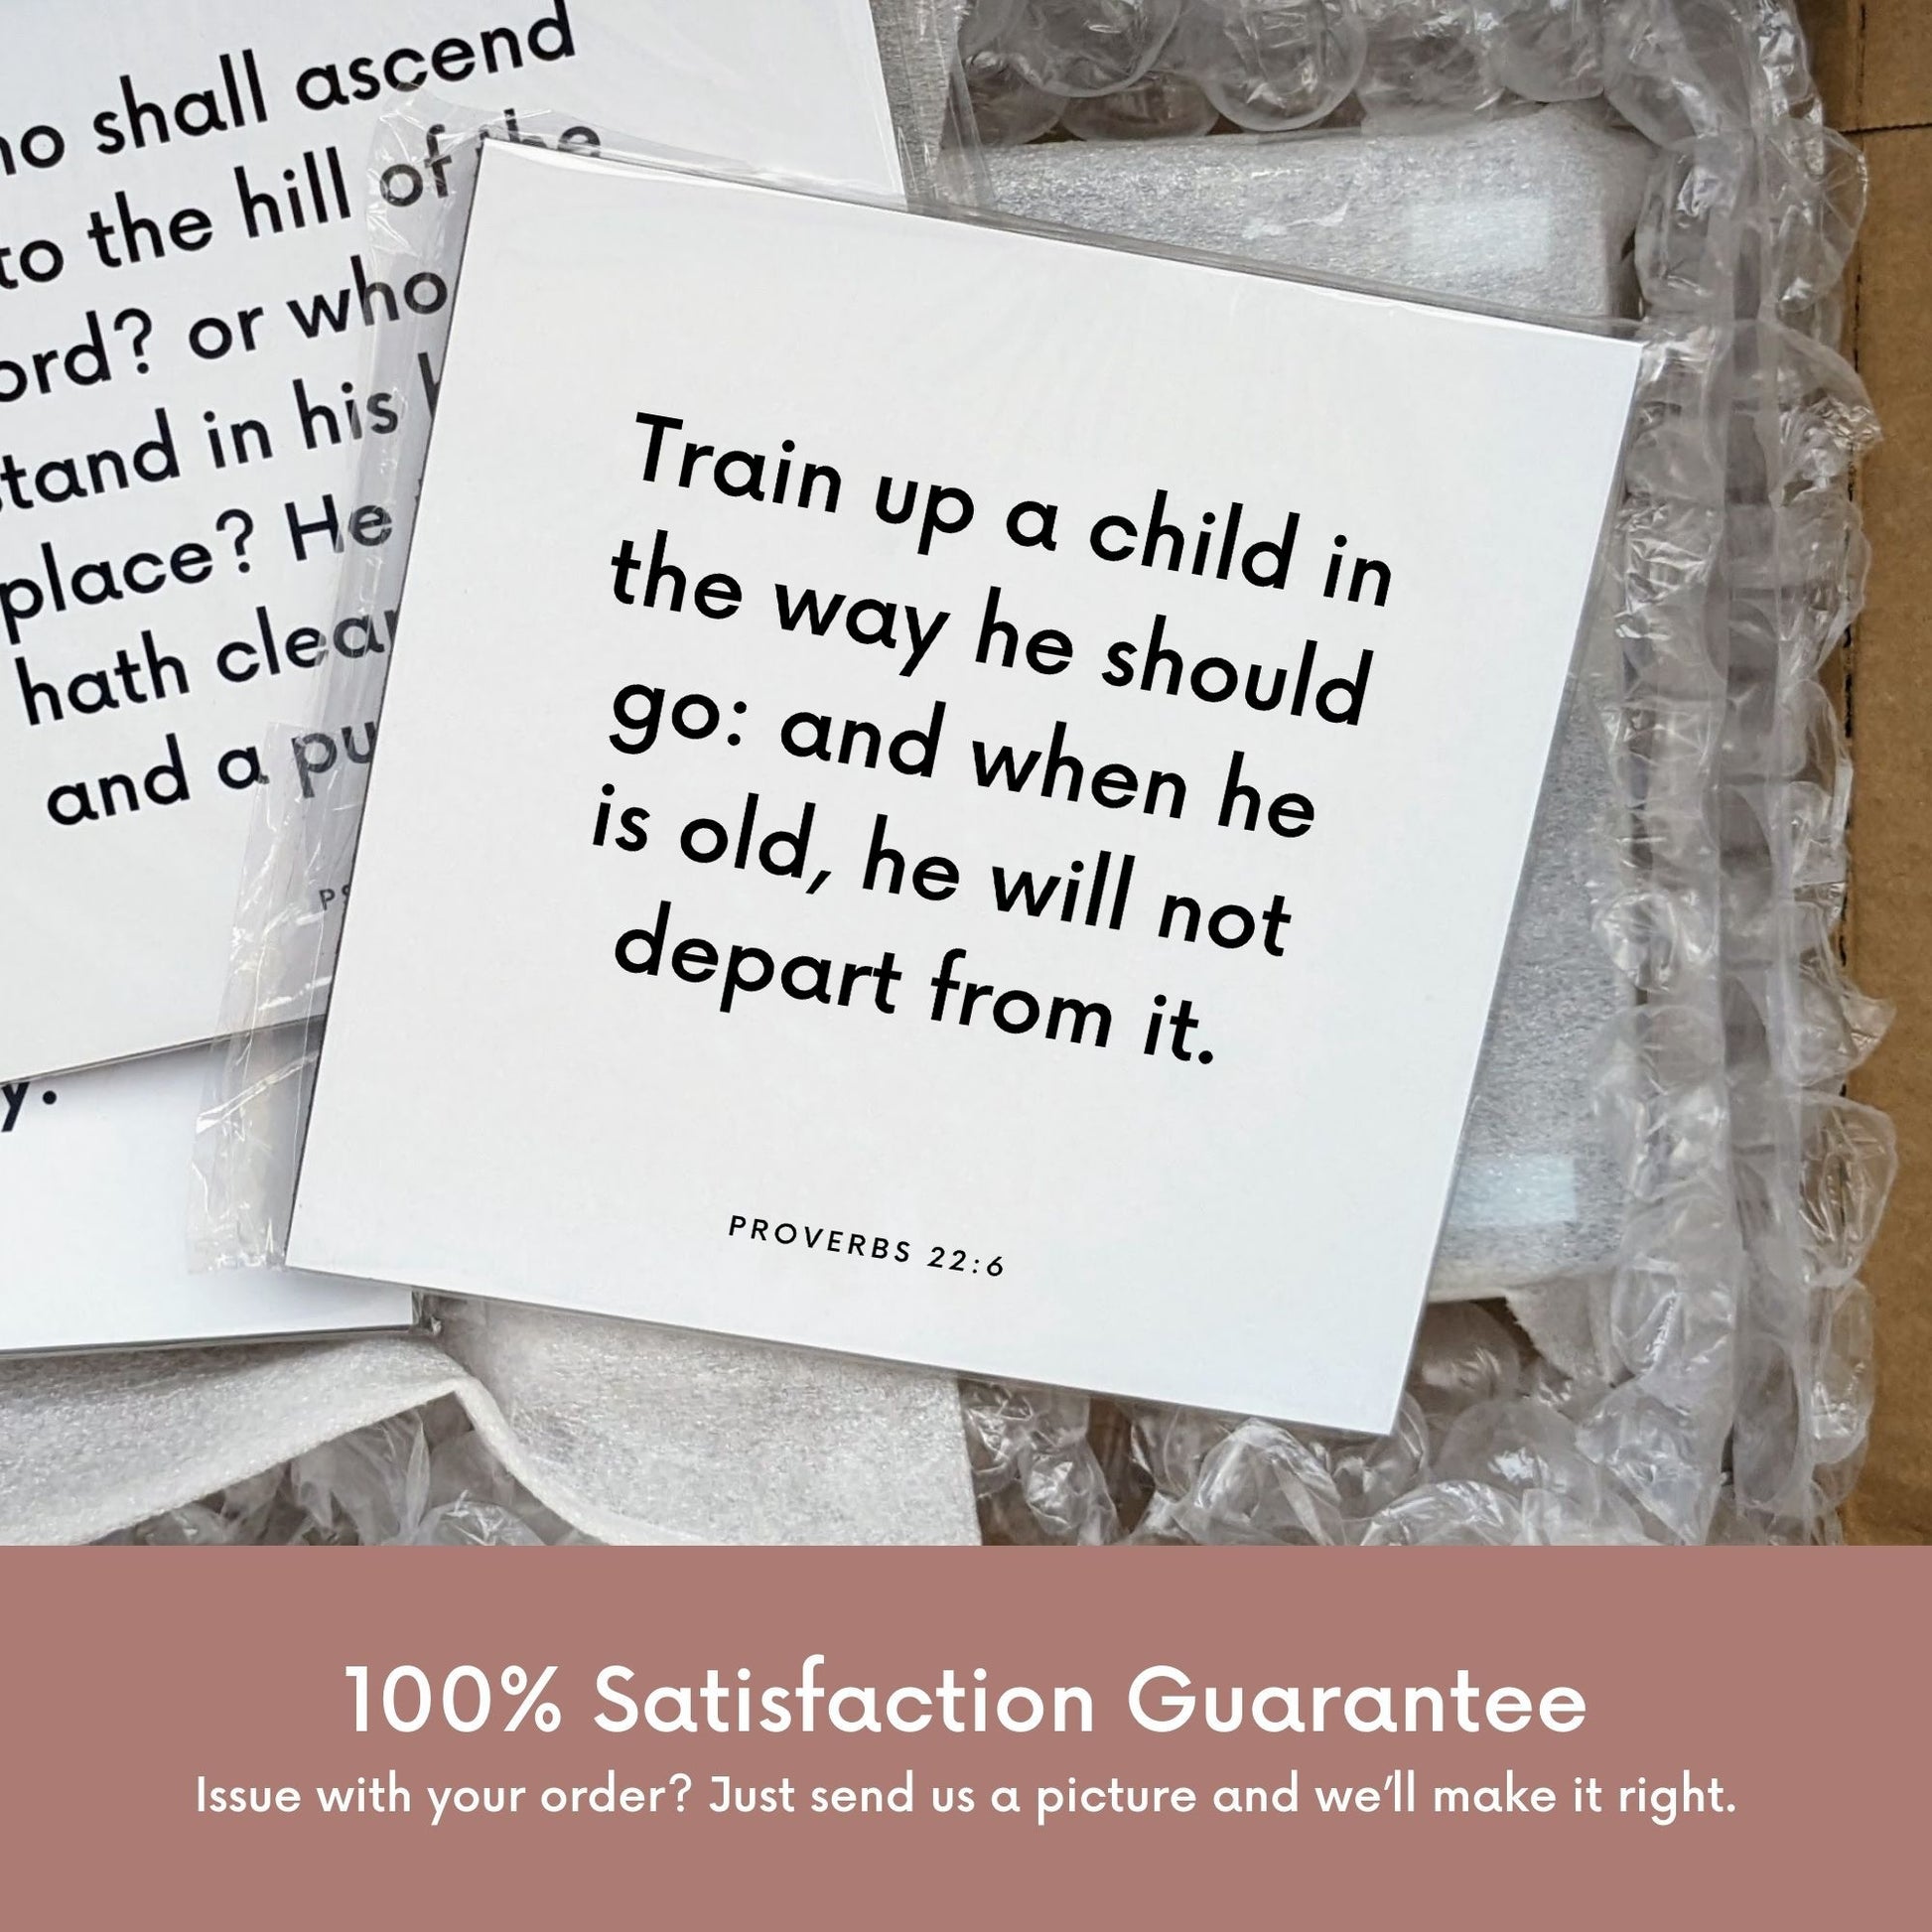 Shipping materials for scripture tile of Proverbs 22:6 - "Train up a child in the way he should go"